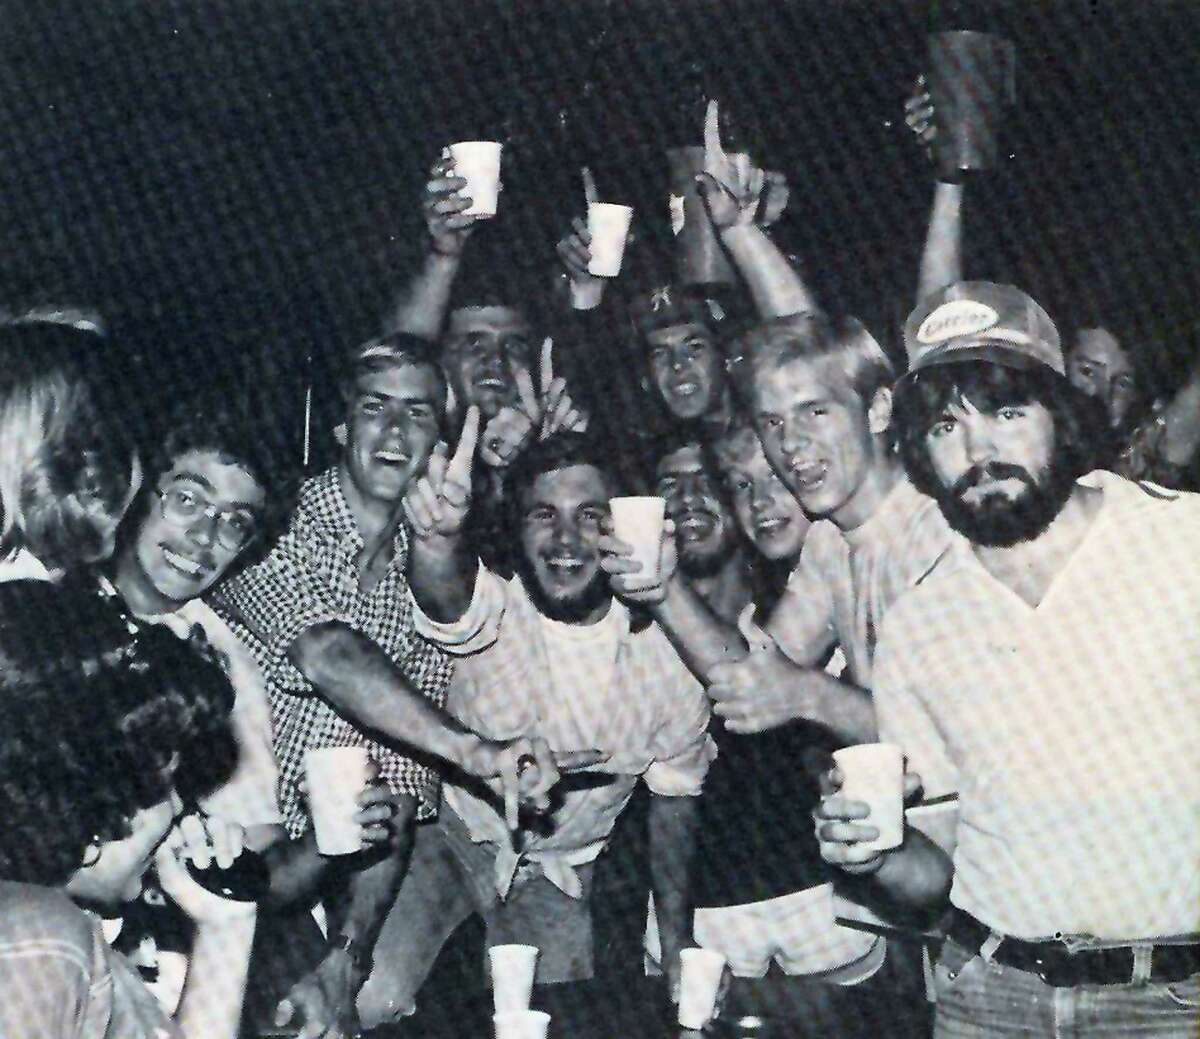 Partygoers enjoy a night out at the University Pub on the campus of St. Mary's University. The photograph that appeared in the Diamondback yearbook in 1978.